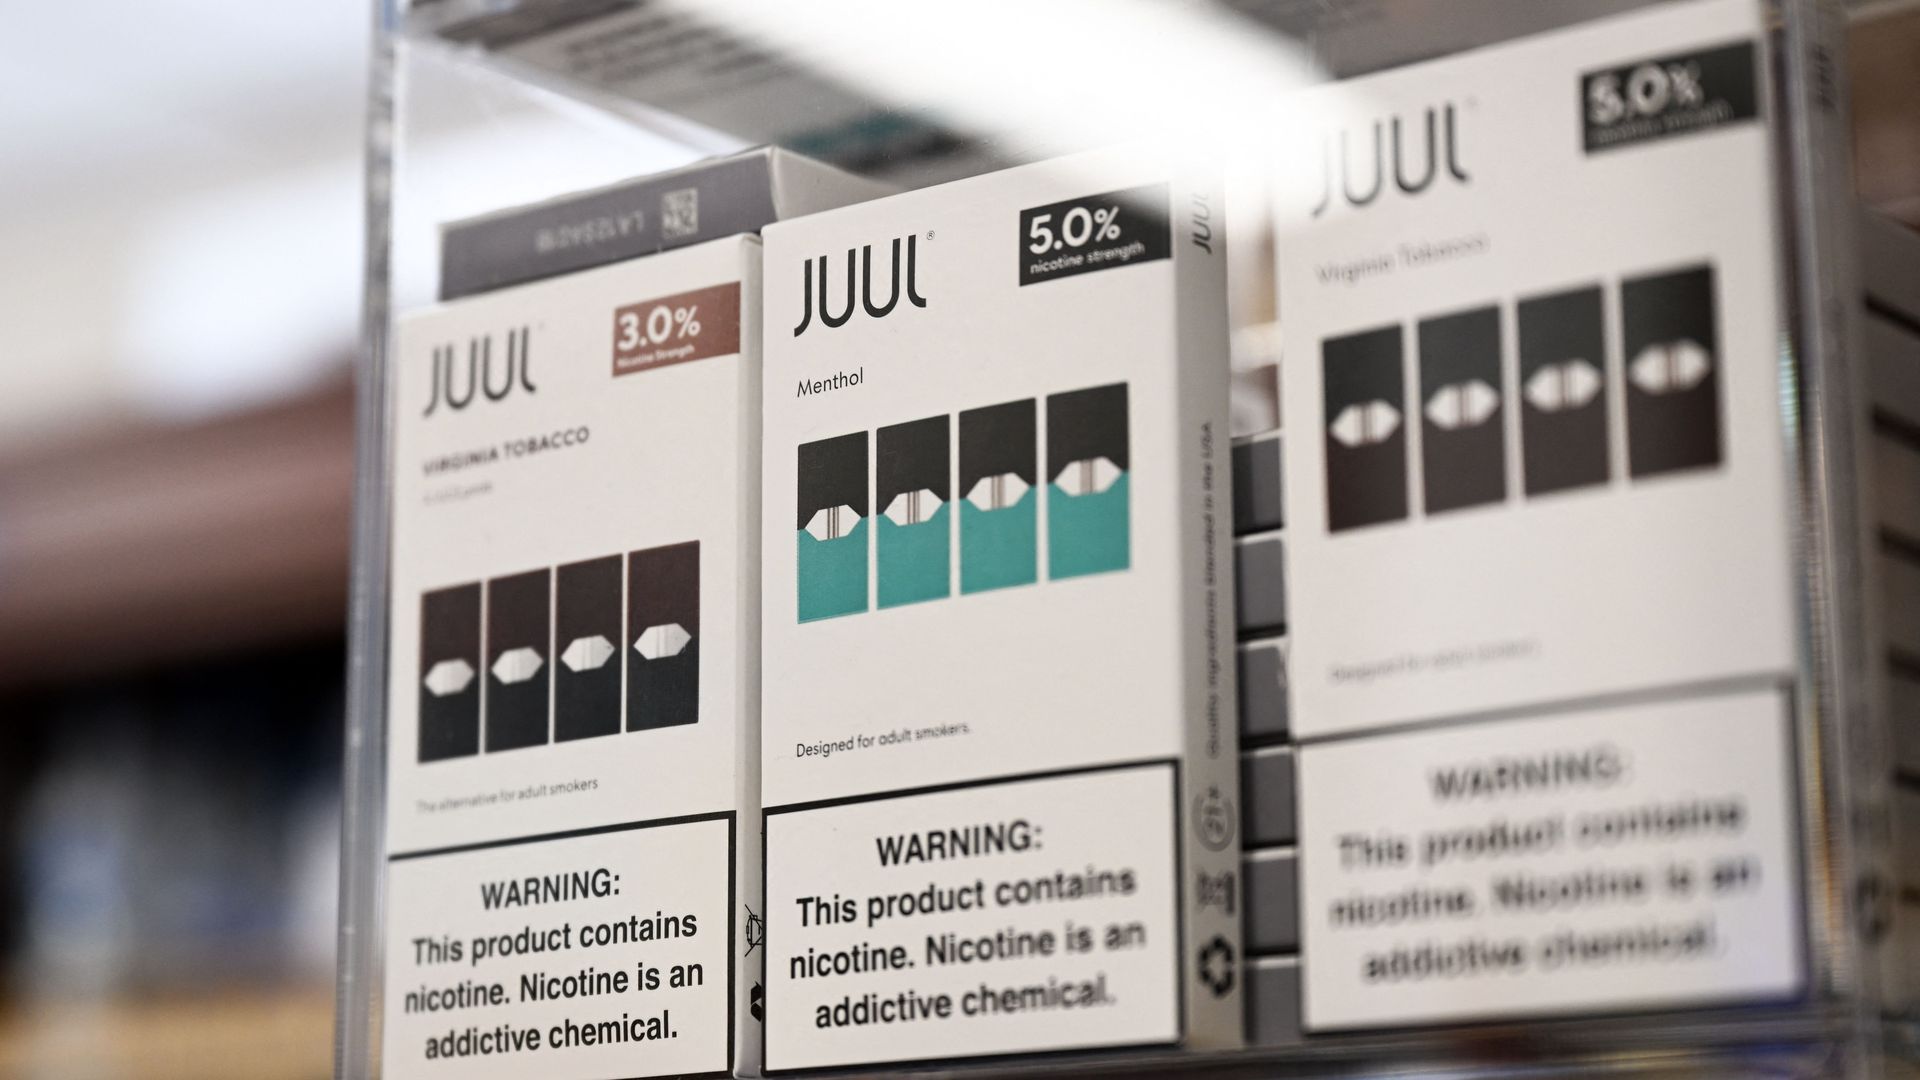 Juul vaping products on display